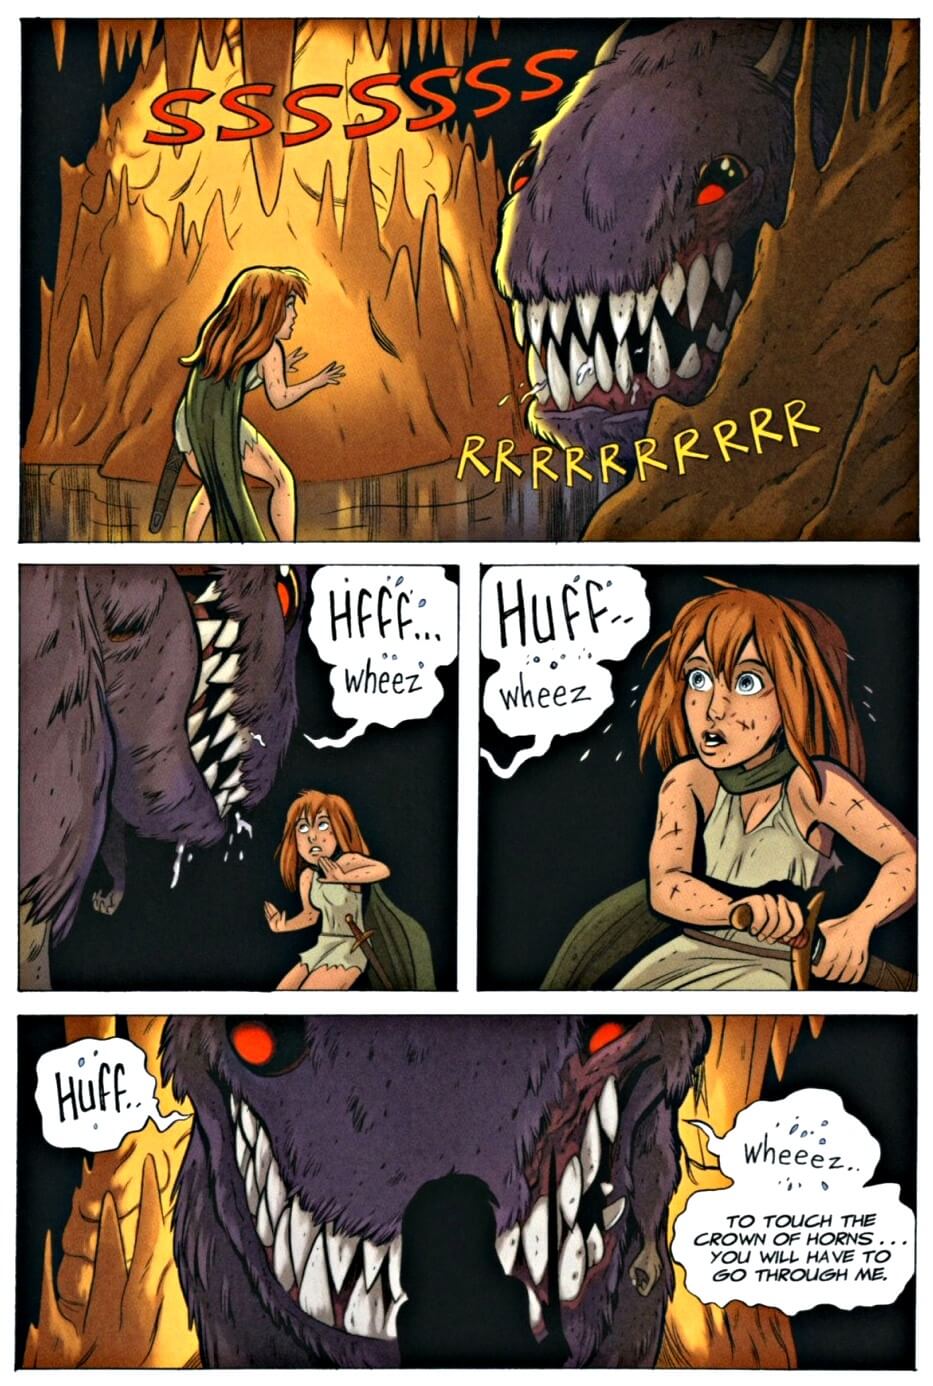 page 134 chapter 5 of bone 9 crown of horns graphic novel